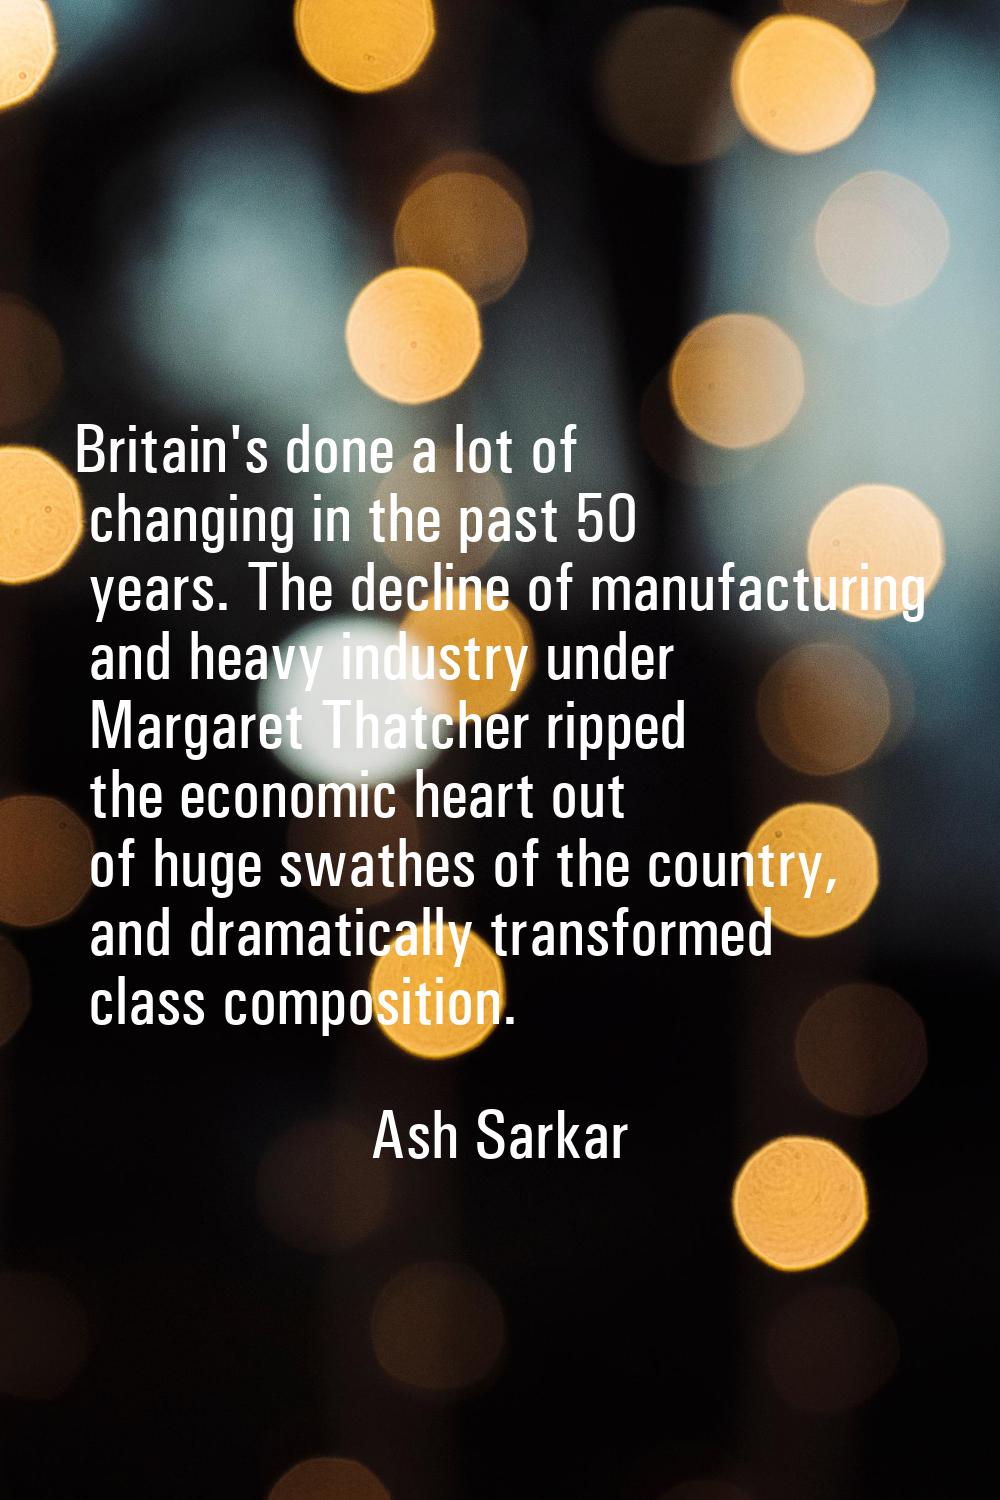 Britain's done a lot of changing in the past 50 years. The decline of manufacturing and heavy indus